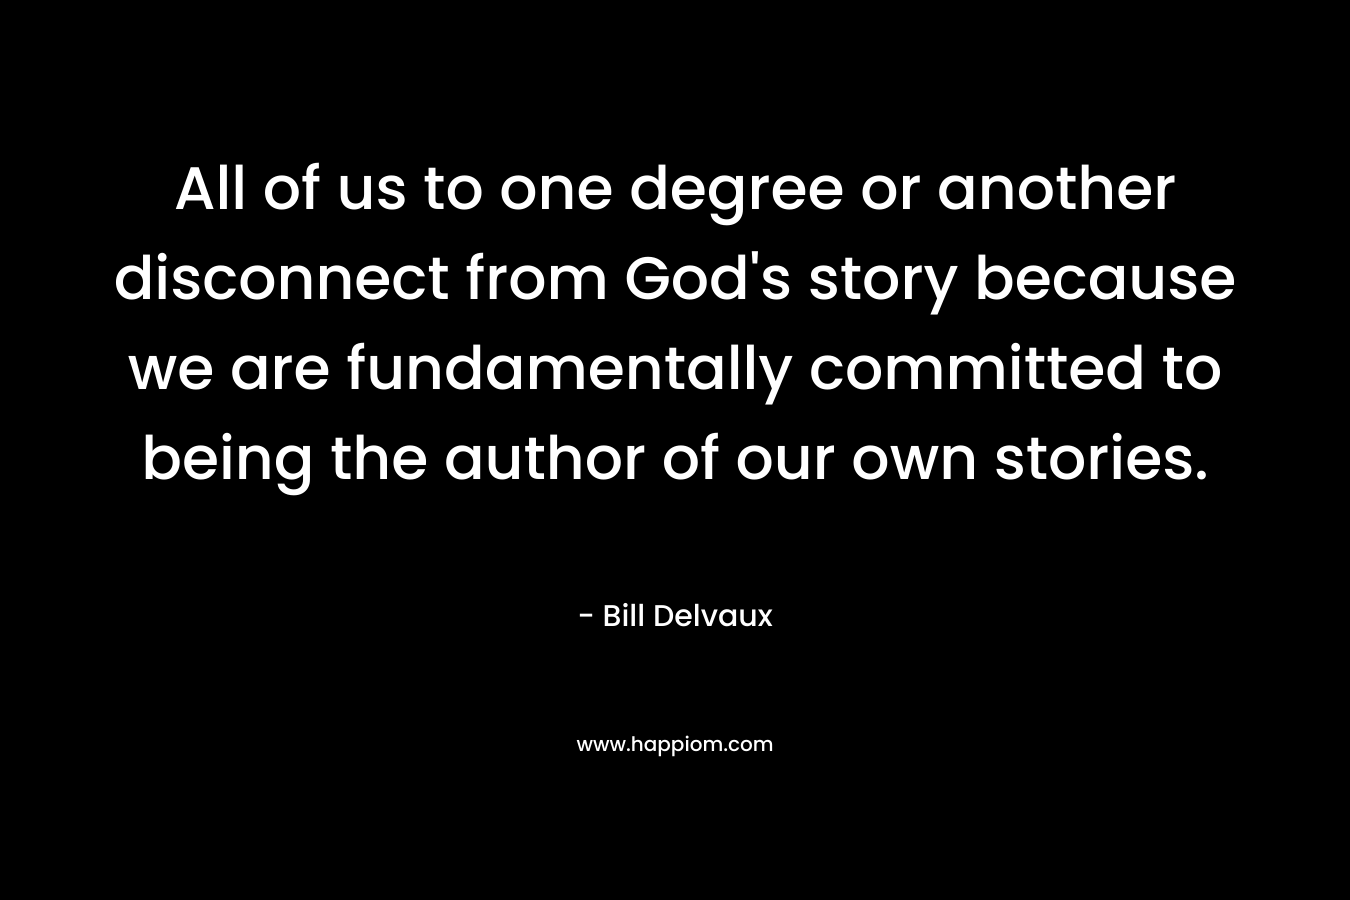 All of us to one degree or another disconnect from God’s story because we are fundamentally committed to being the author of our own stories. – Bill Delvaux